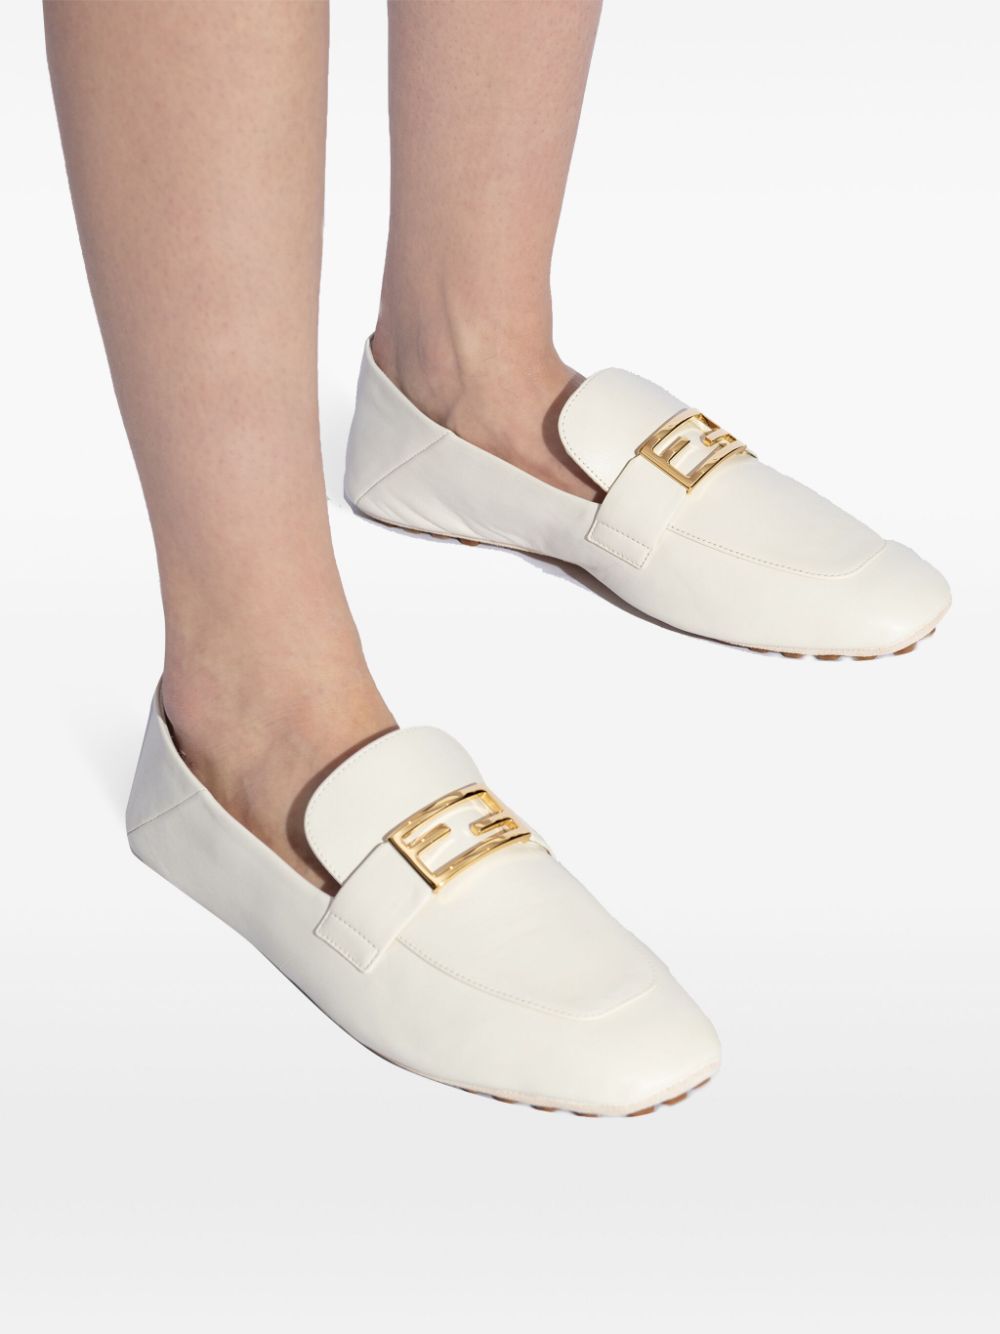 FENDI White Leather Loafers for Women - SS24 Collection